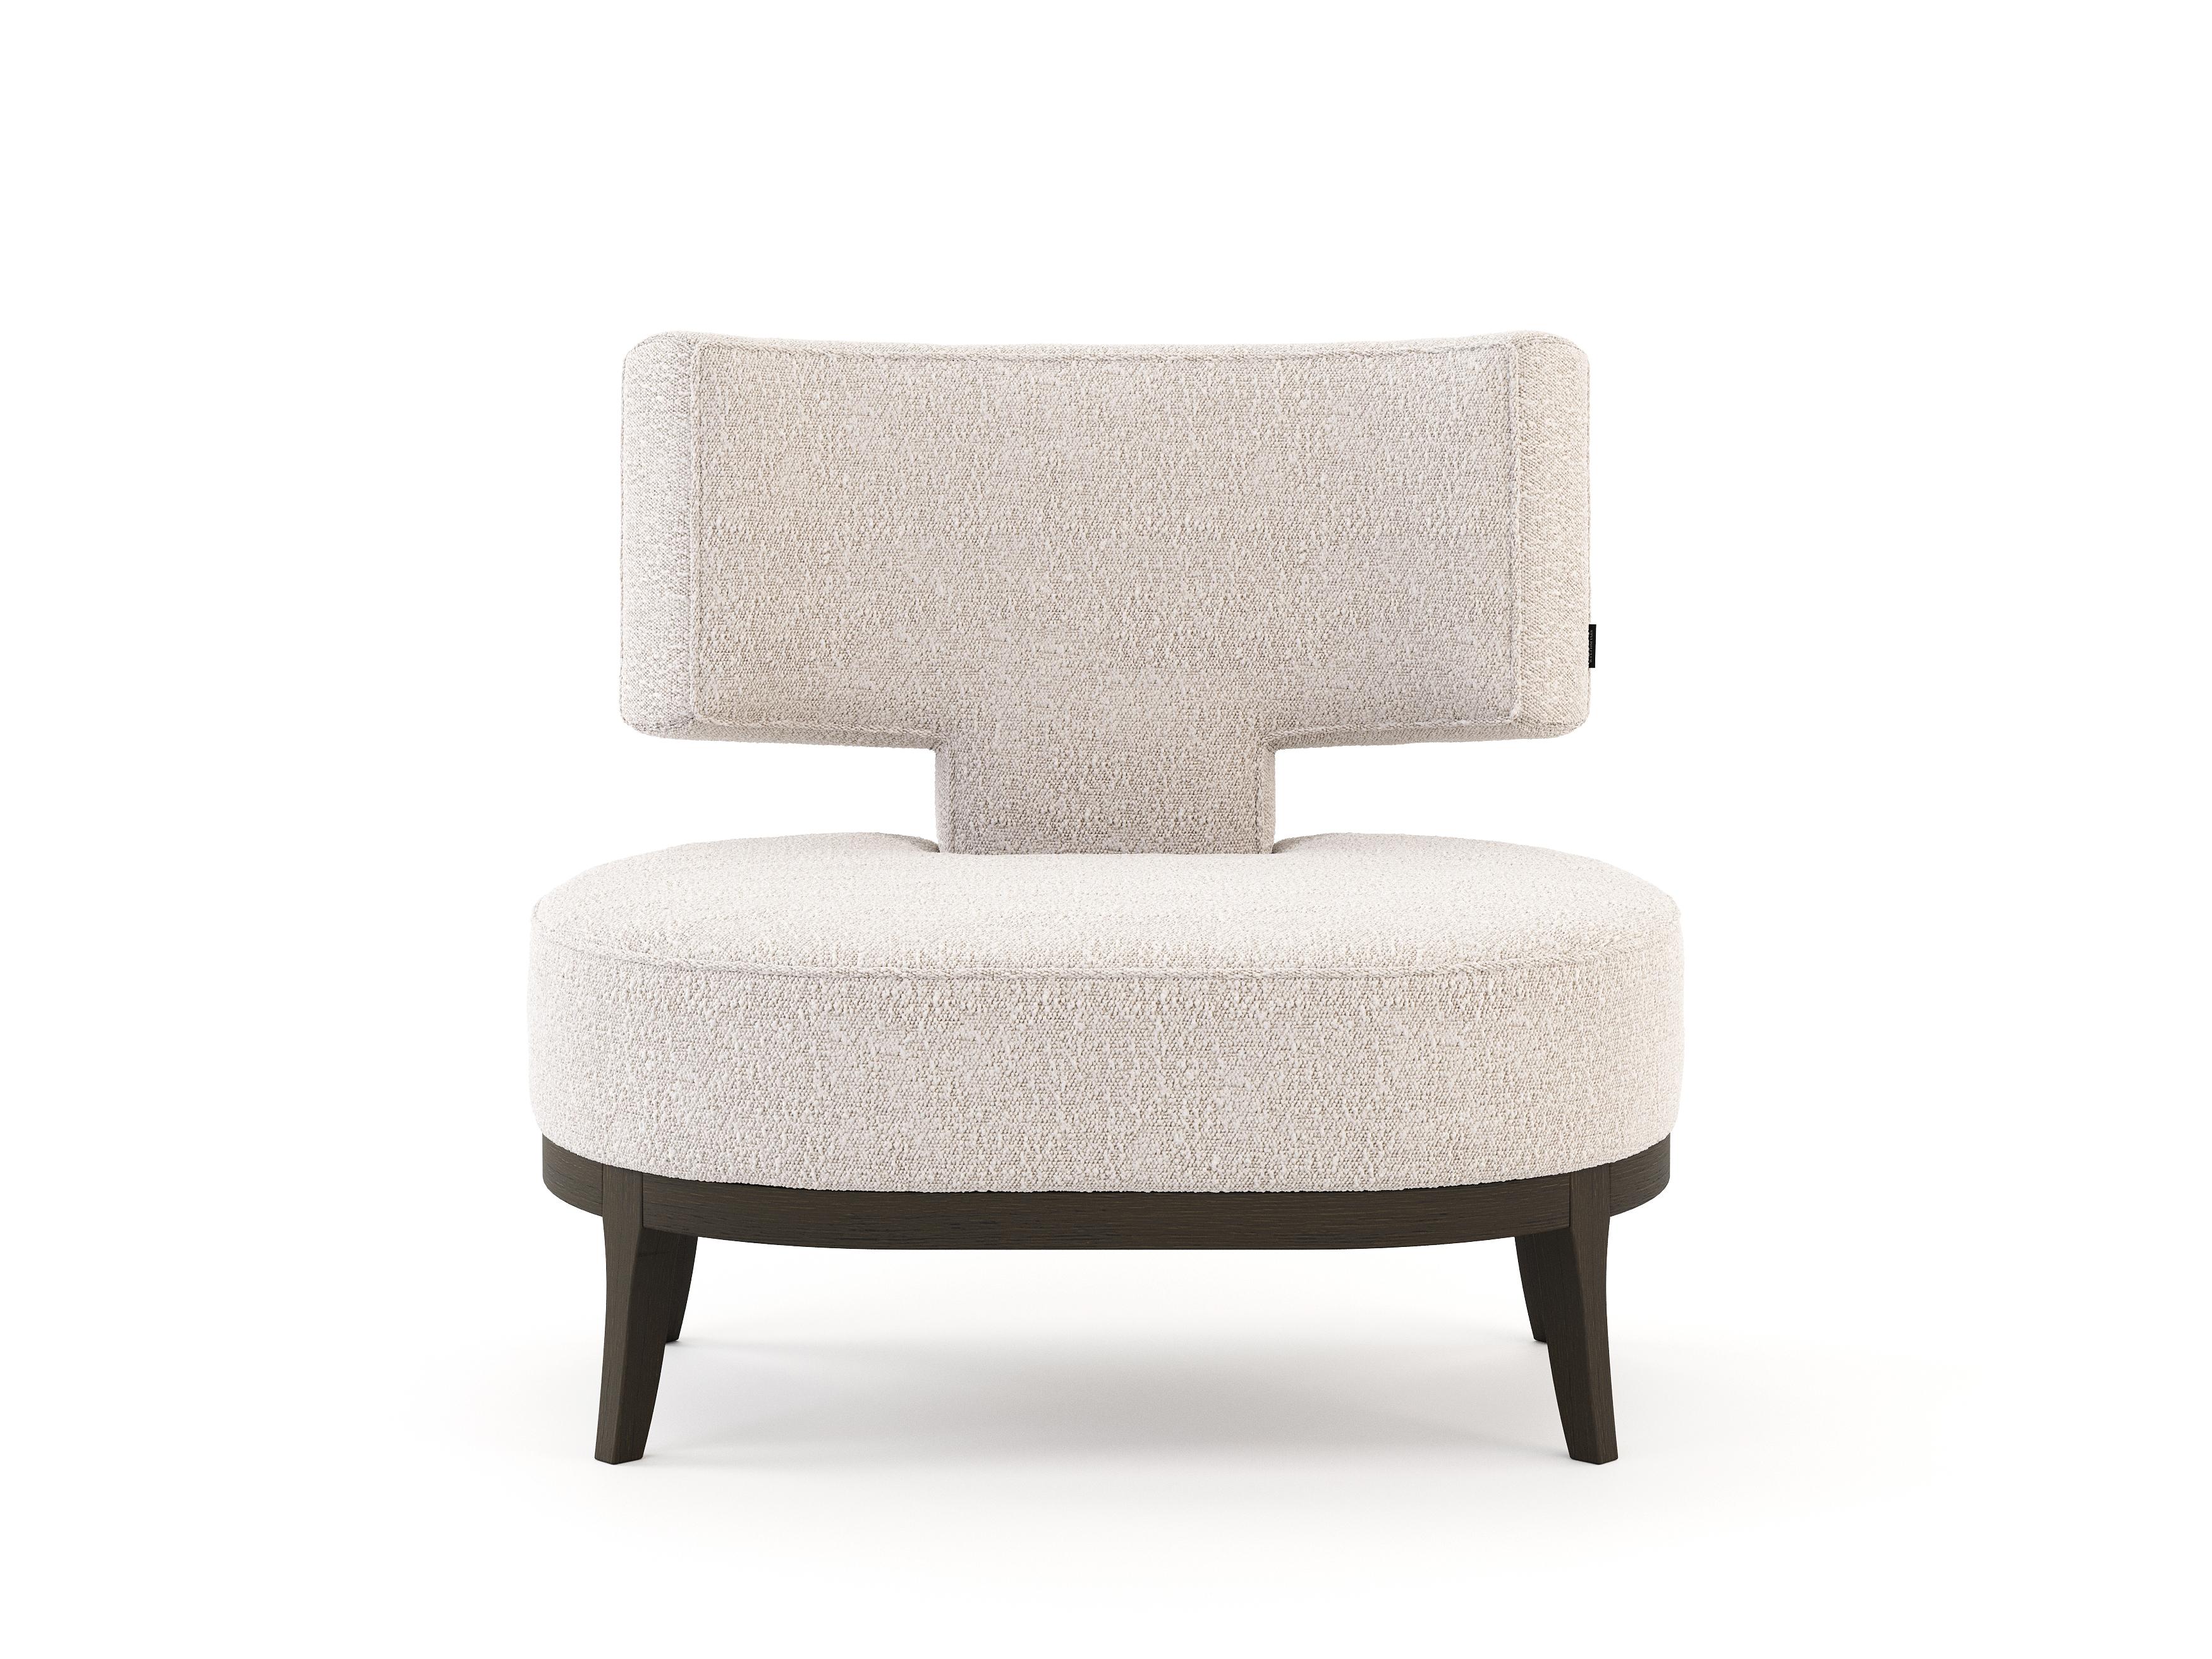 The Passione collection reflects the feminine elegance of the rounded forms of its pieces. Each design piece is essential to complete the space in a framework of perfect sophistication.

The Passione armchair seduces with its original design. The